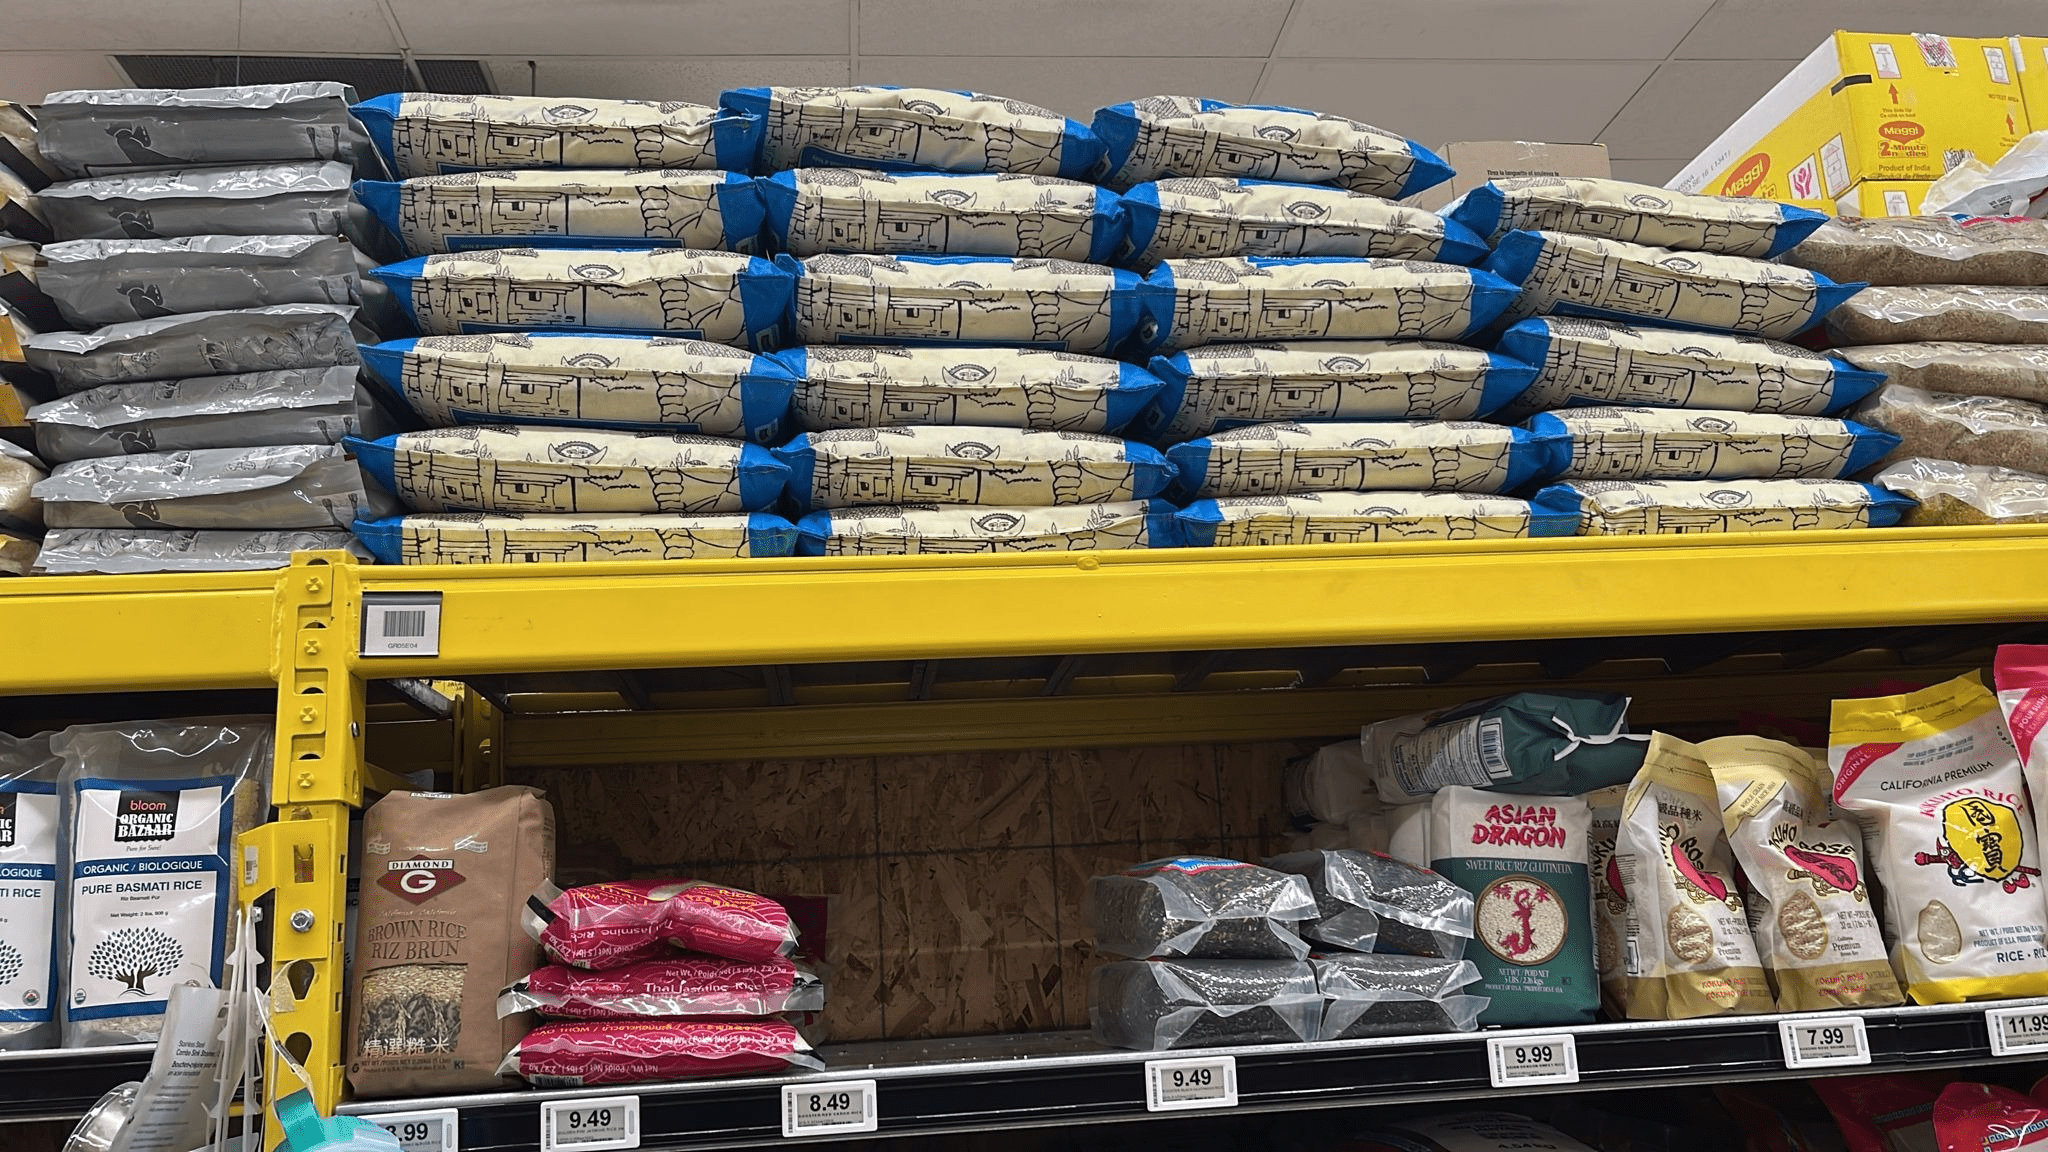 rice bags in a grocery store